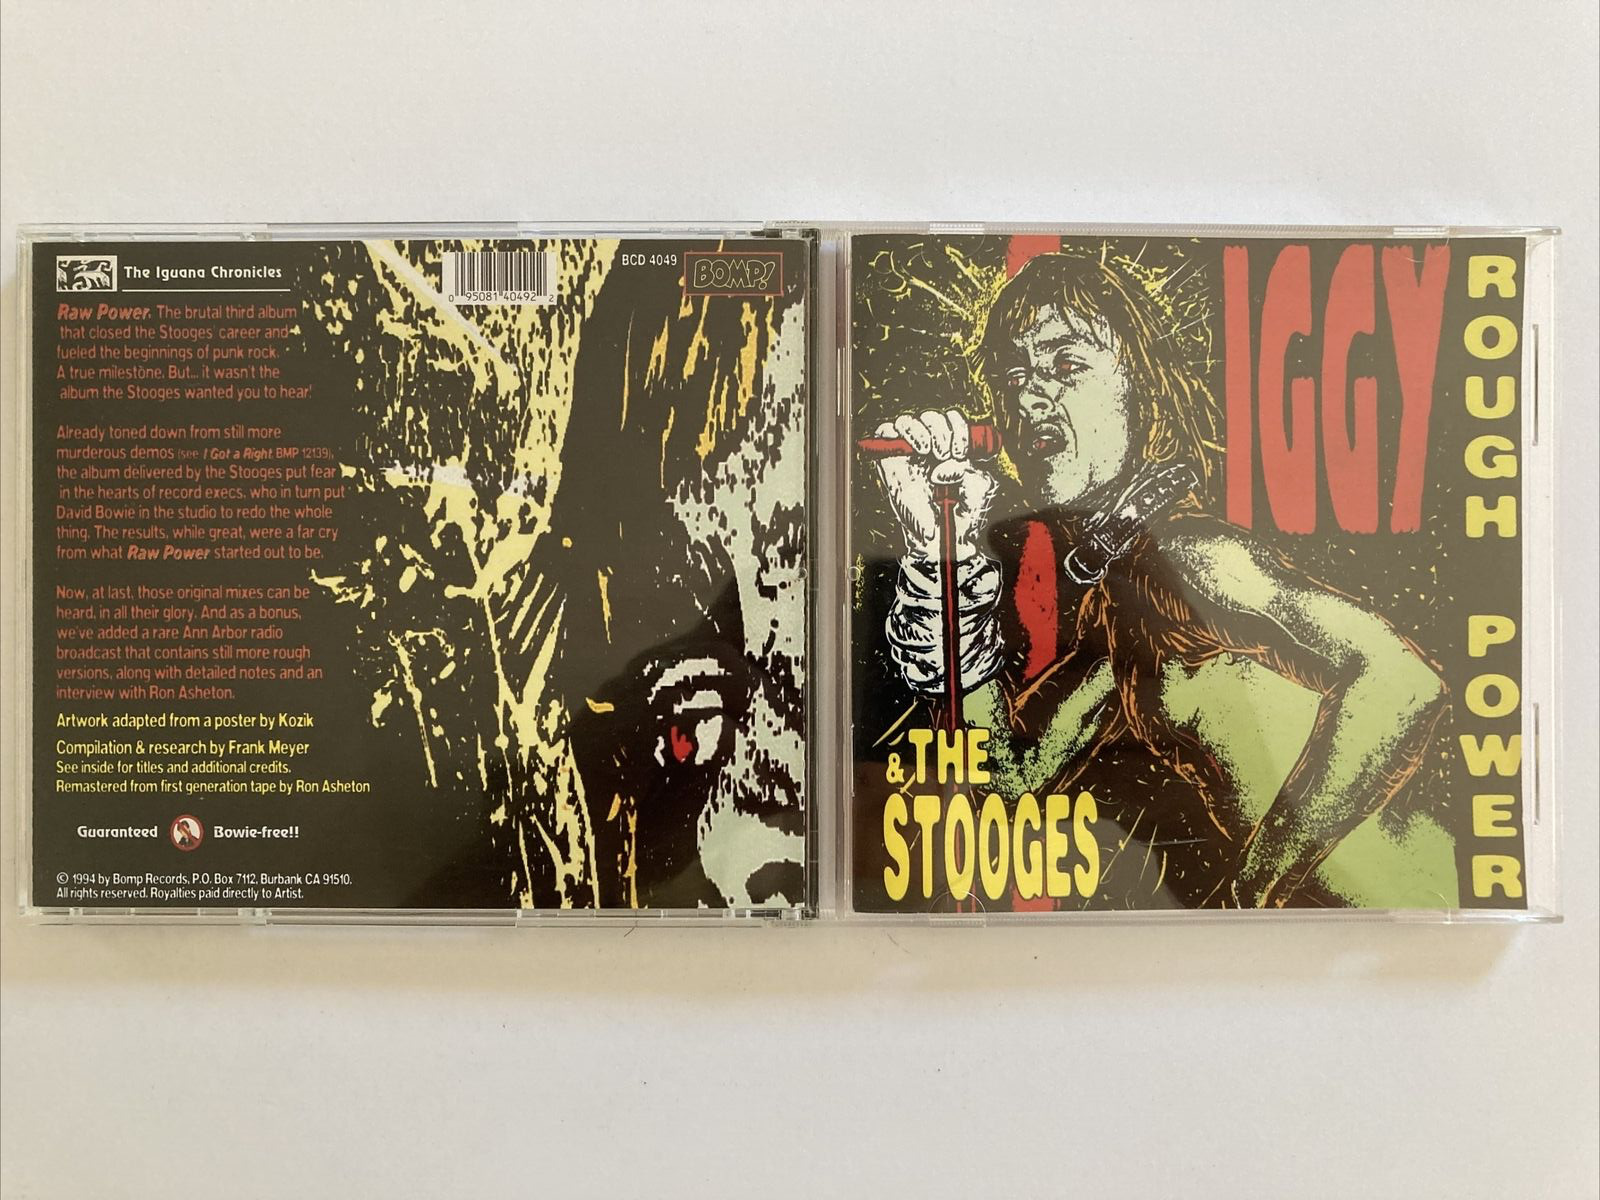 Rough Power by Iggy & the Stooges (CD, Oct-2005, Bomp) Like New Condition